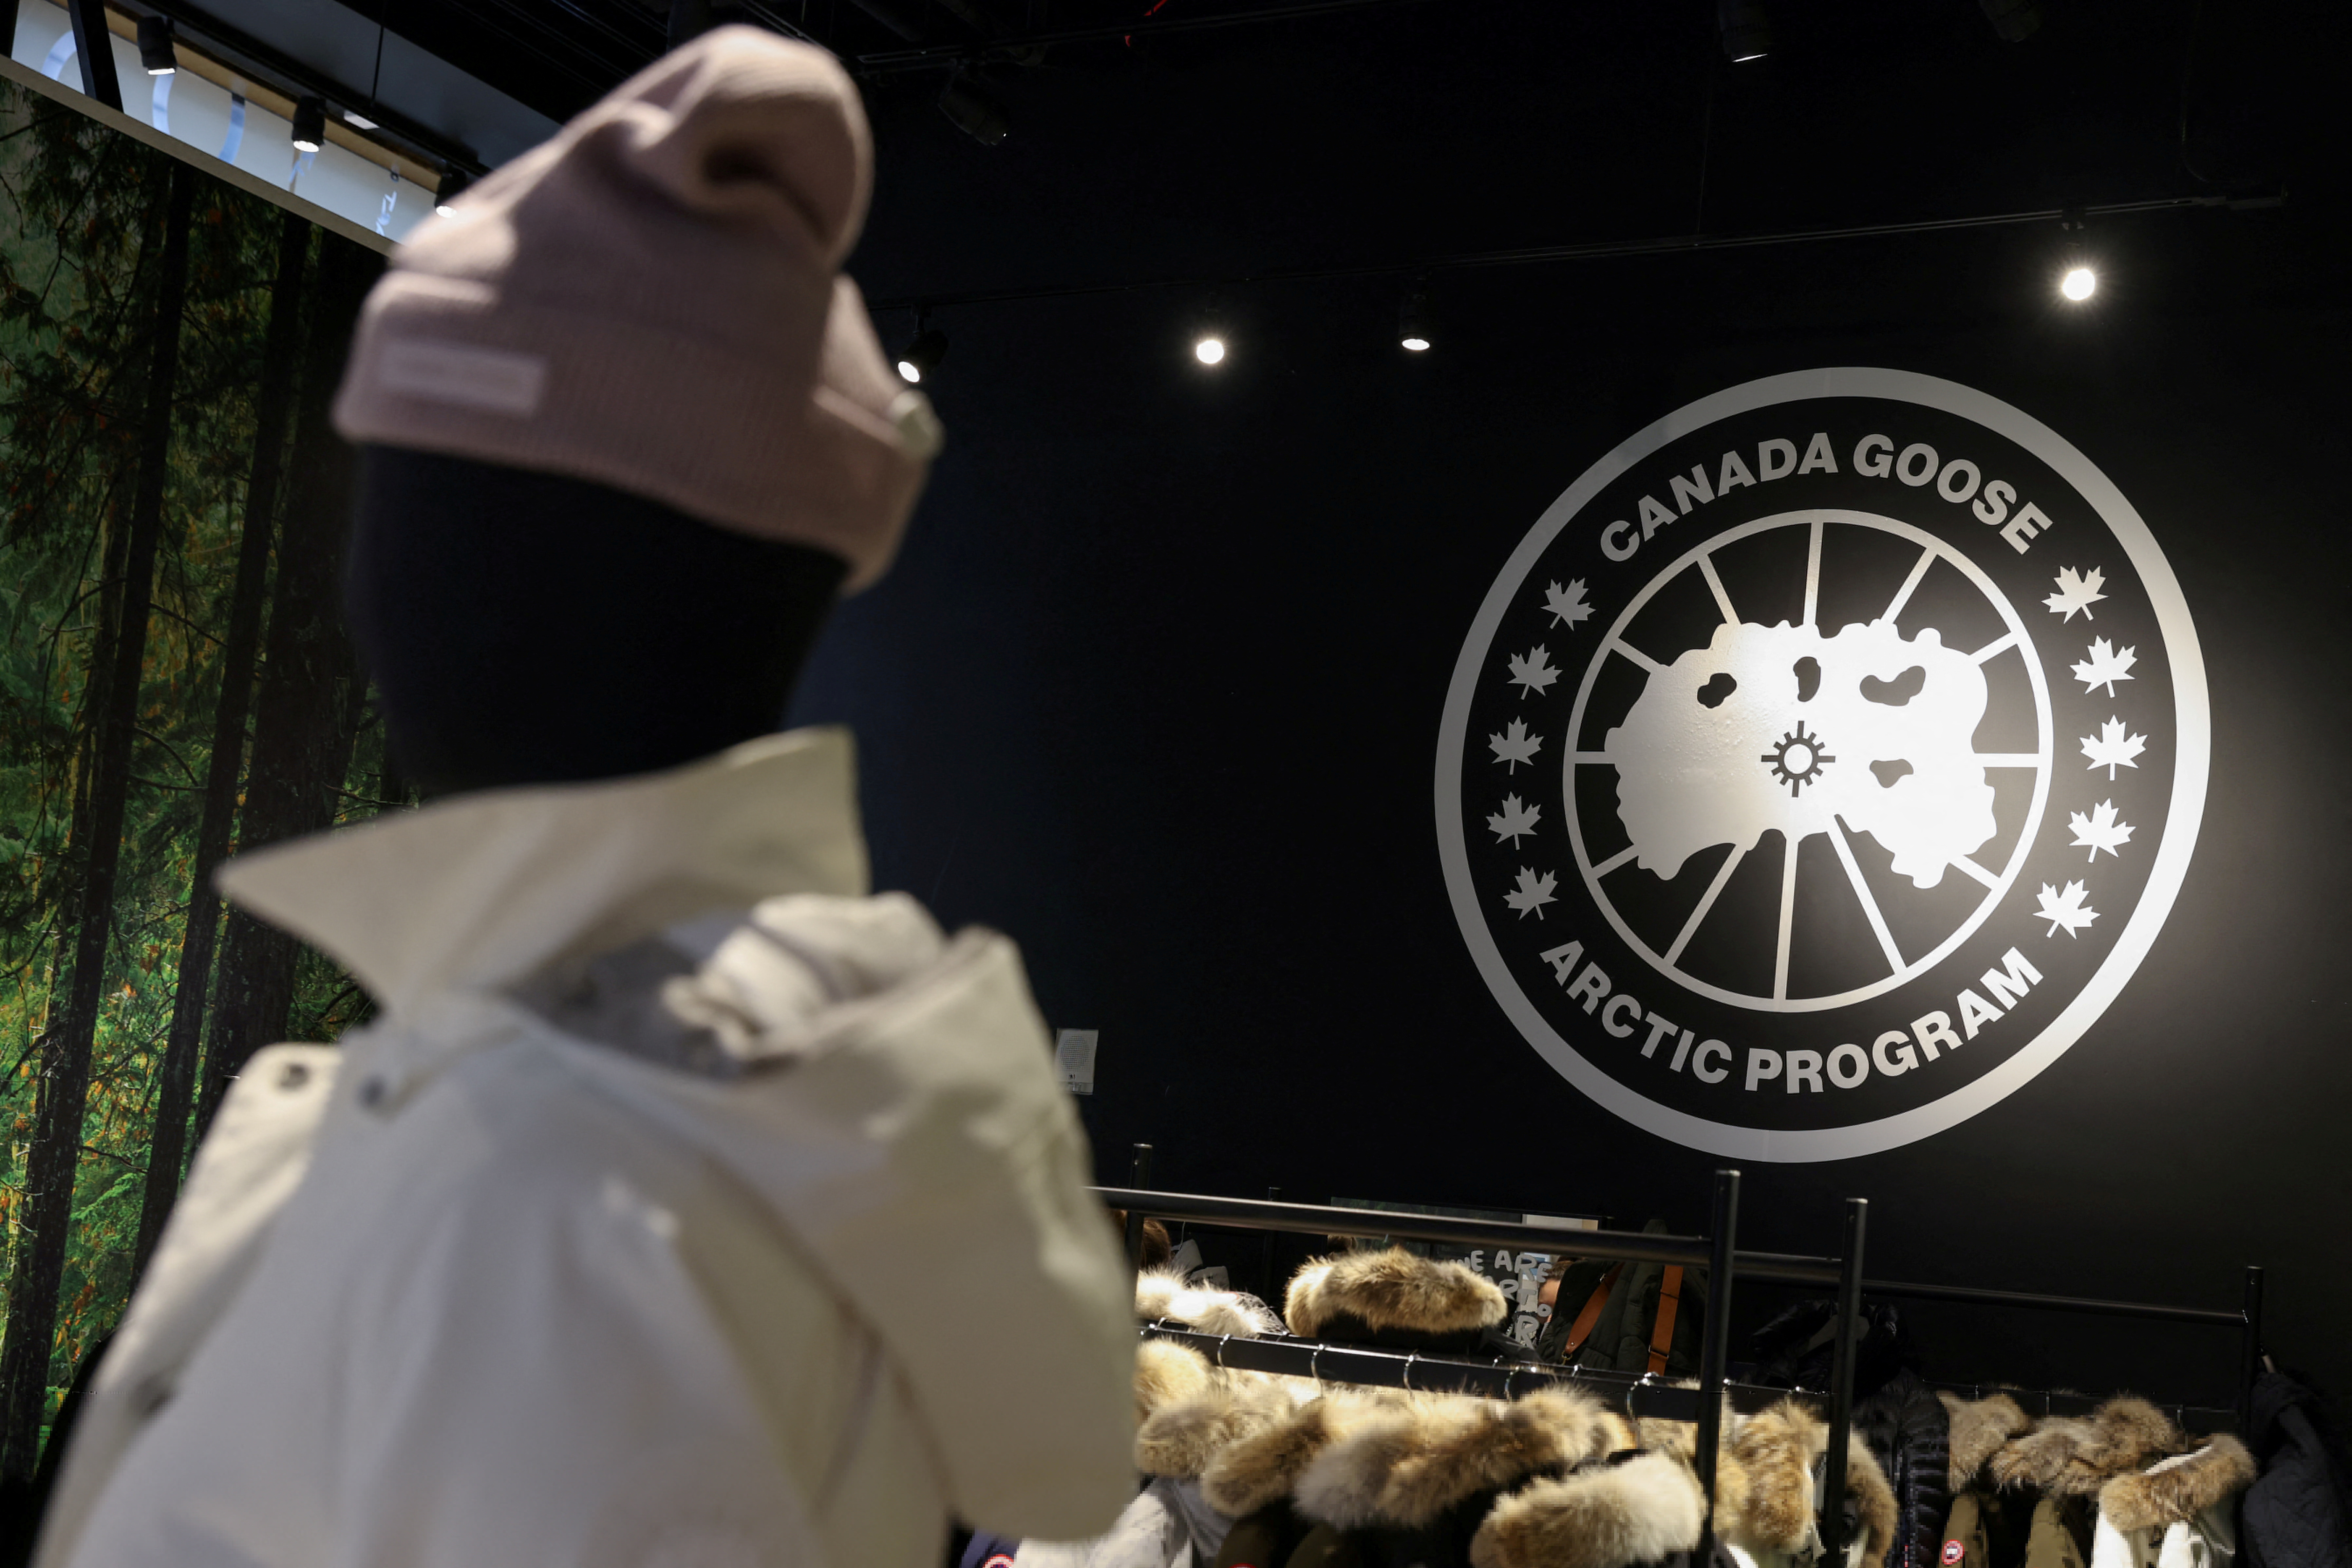 The logo of Canada Goose is seen in a store in Manhattan, New York City